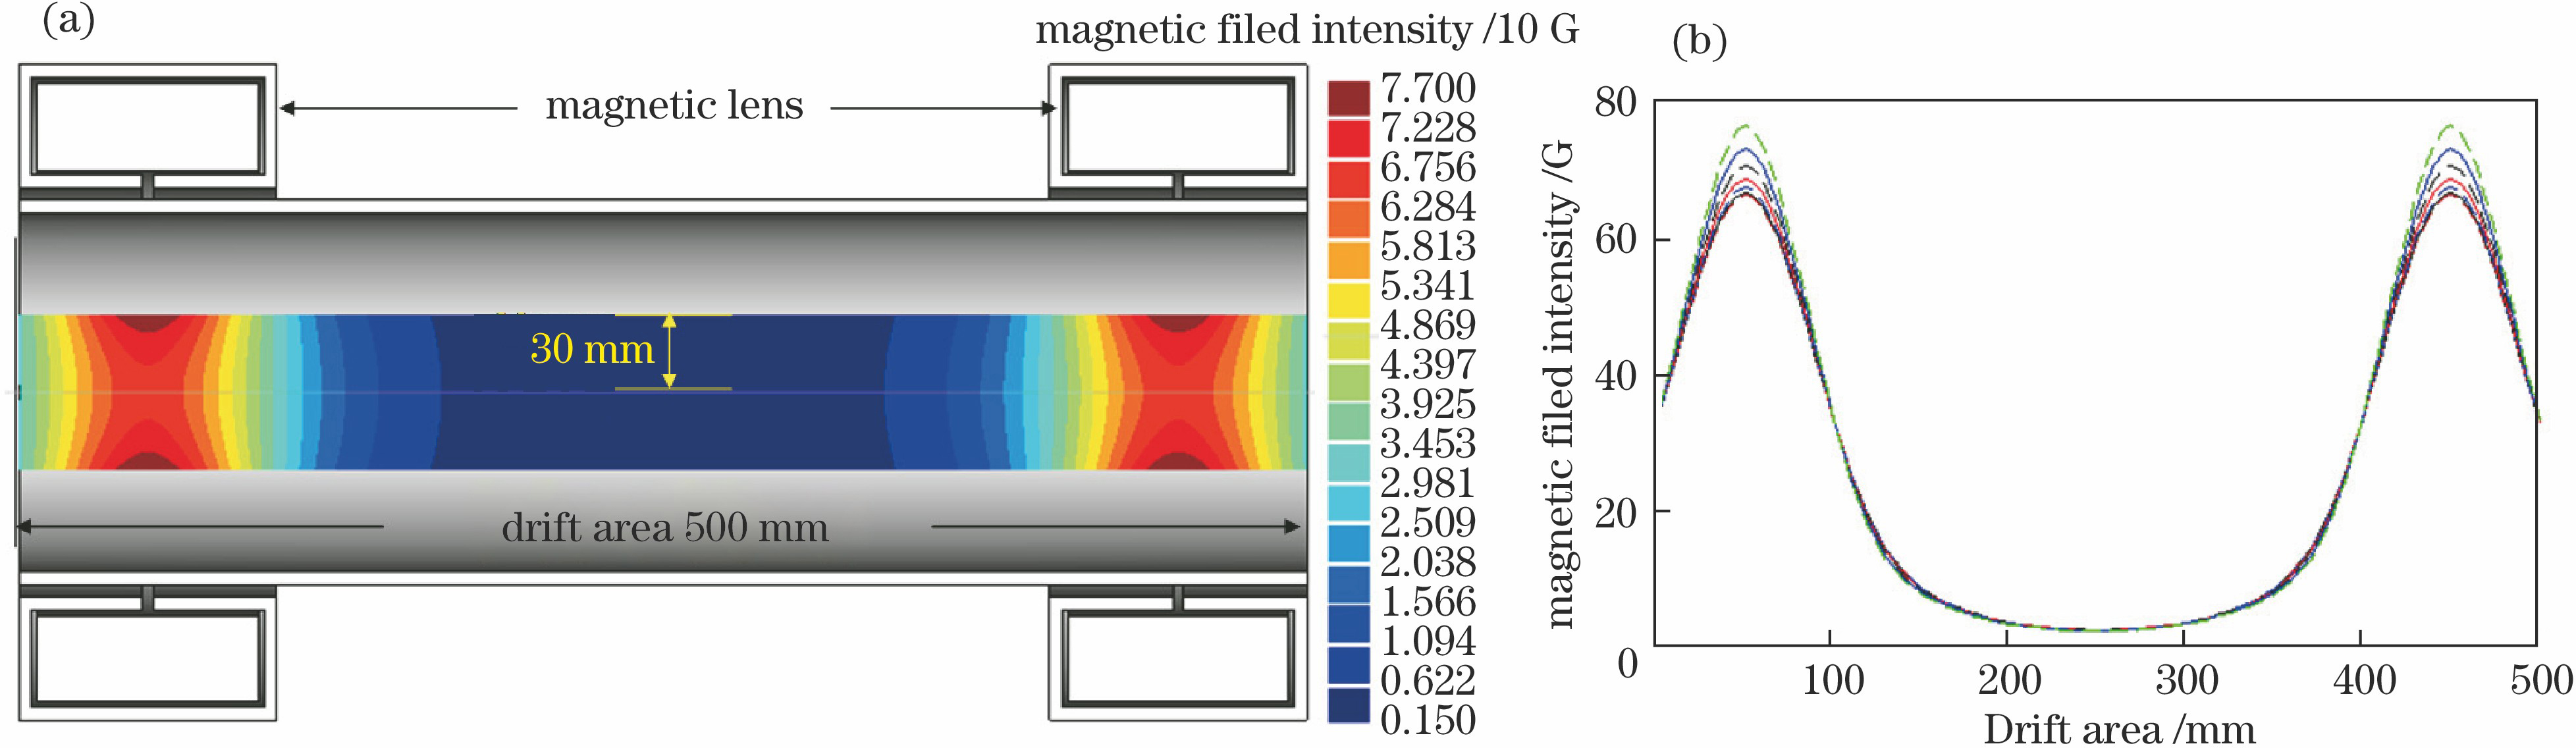 Magnetic field intensity distribution in drift area of camera. (a) Schematic of magnetic field intensity contours in 30 mm off-axis area; (b) magnetic field intensity distributions at positions of 0-30 mm along axis (step of 5 mm)